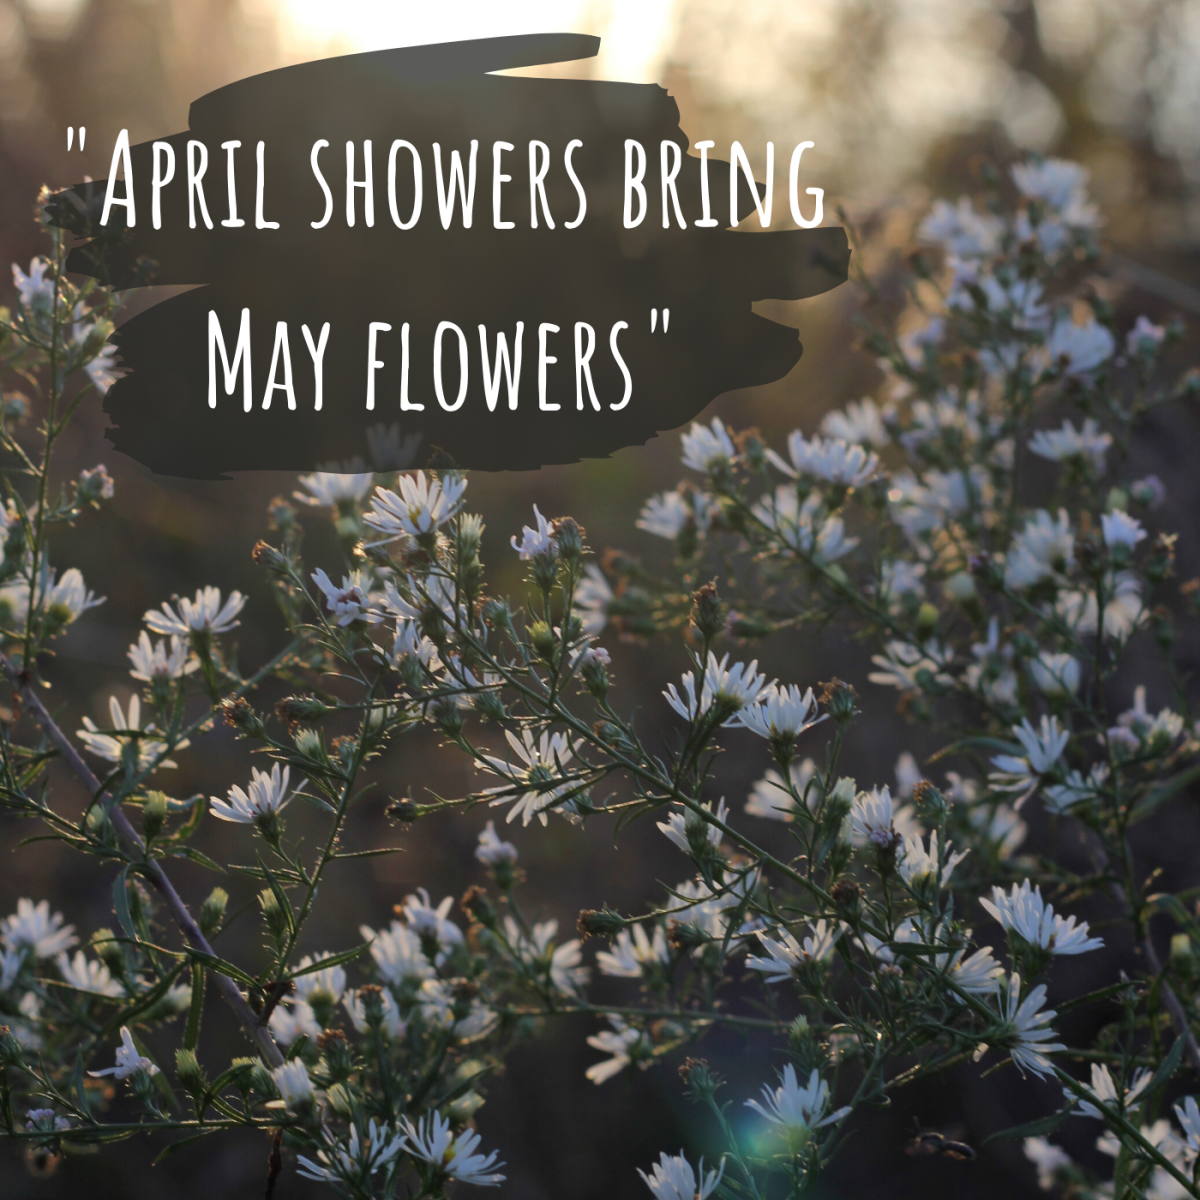 April showers bring May flowers. 